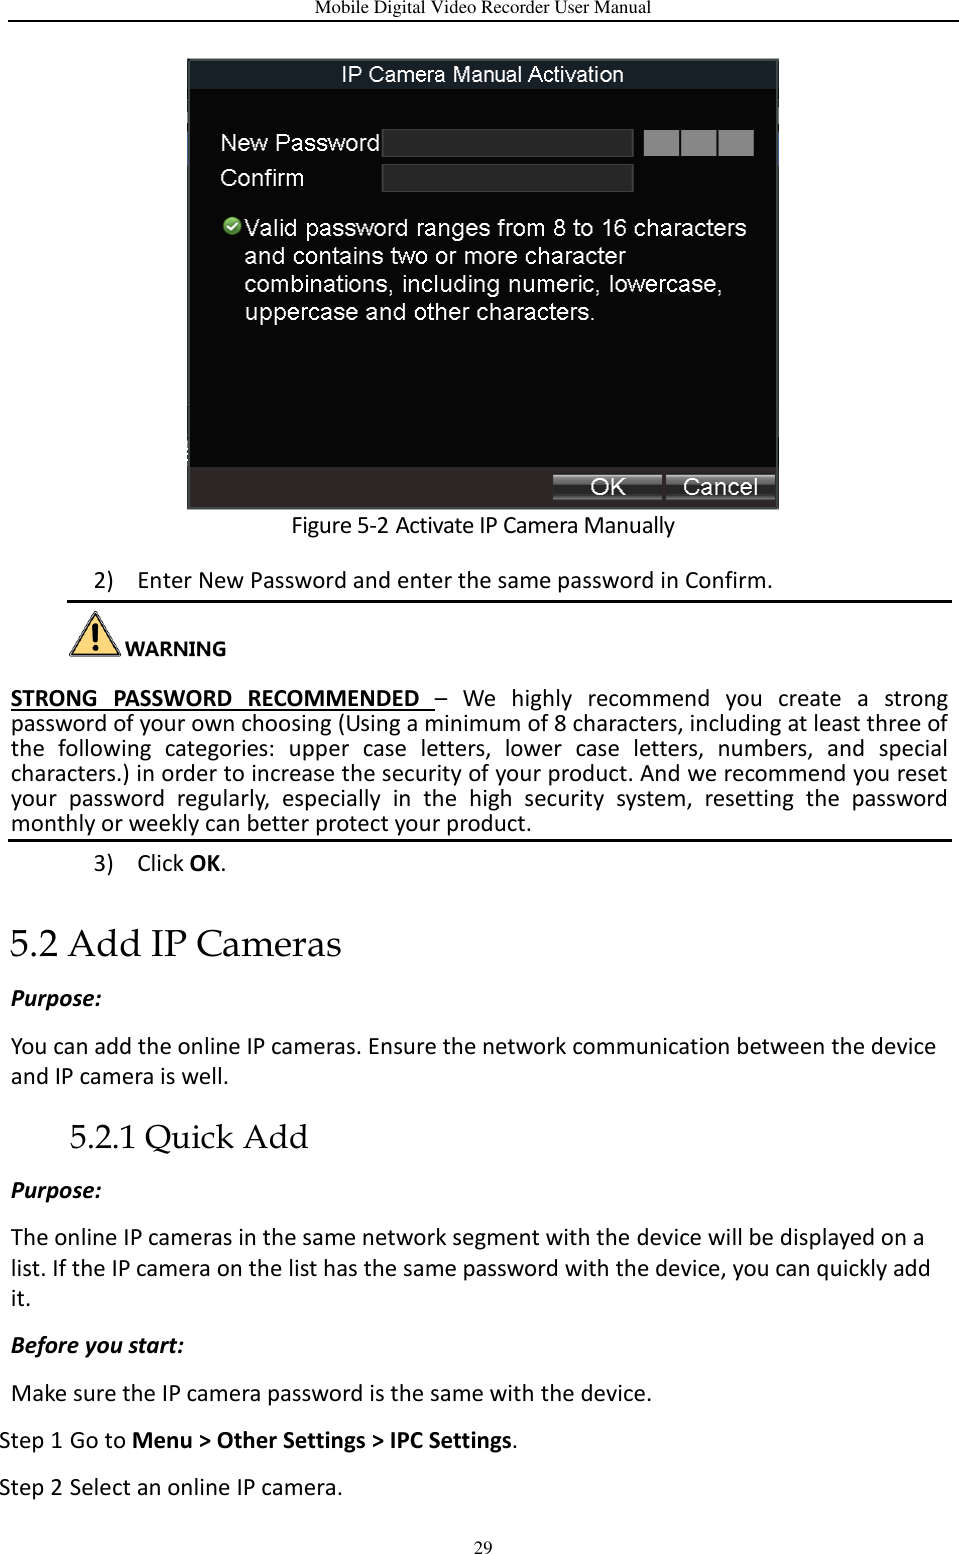 Mobile Digital Video Recorder User Manual 29  Figure 5-2 Activate IP Camera Manually 2) Enter New Password and enter the same password in Confirm.   STRONG  PASSWORD  RECOMMENDED  –  We  highly  recommend  you  create  a  strong password of your own choosing (Using a minimum of 8 characters, including at least three of the  following  categories:  upper  case  letters,  lower  case  letters,  numbers,  and  special characters.) in order to increase the security of your product. And we recommend you reset your  password  regularly,  especially  in  the  high  security  system,  resetting  the  password monthly or weekly can better protect your product. 3) Click OK. 5.2 Add IP Cameras Purpose: You can add the online IP cameras. Ensure the network communication between the device and IP camera is well. 5.2.1 Quick Add Purpose: The online IP cameras in the same network segment with the device will be displayed on a list. If the IP camera on the list has the same password with the device, you can quickly add it. Before you start: Make sure the IP camera password is the same with the device. Step 1 Go to Menu &gt; Other Settings &gt; IPC Settings. Step 2 Select an online IP camera. 